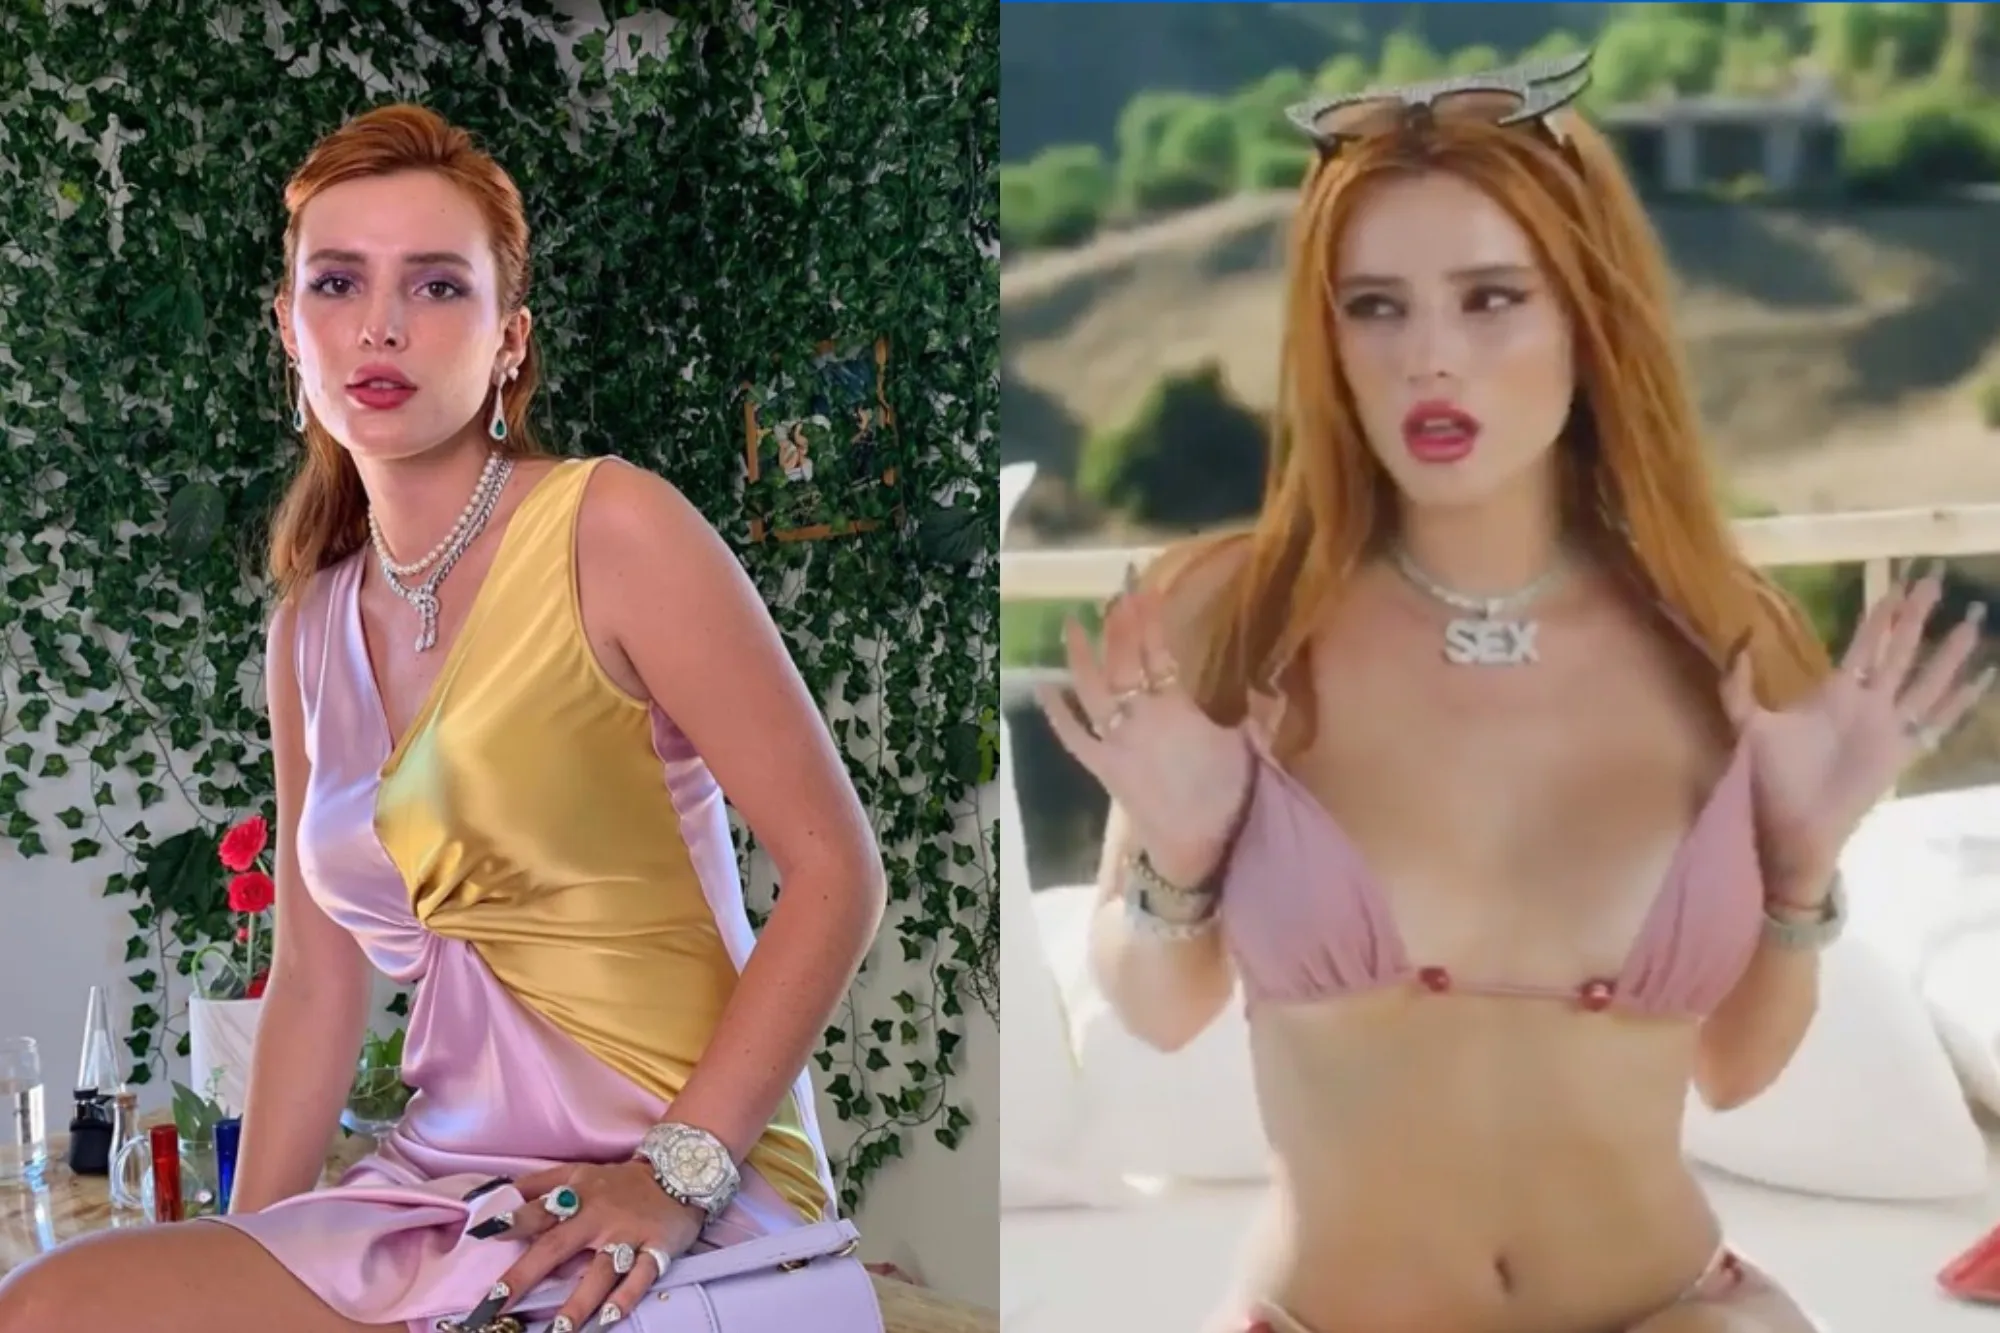 Bella Thorne Creampie Porn - Bella Thorne Is The First To Earn $1 Million in a Day on Only Fansâ€”But What  About Actual Sex Workers?HelloGiggles